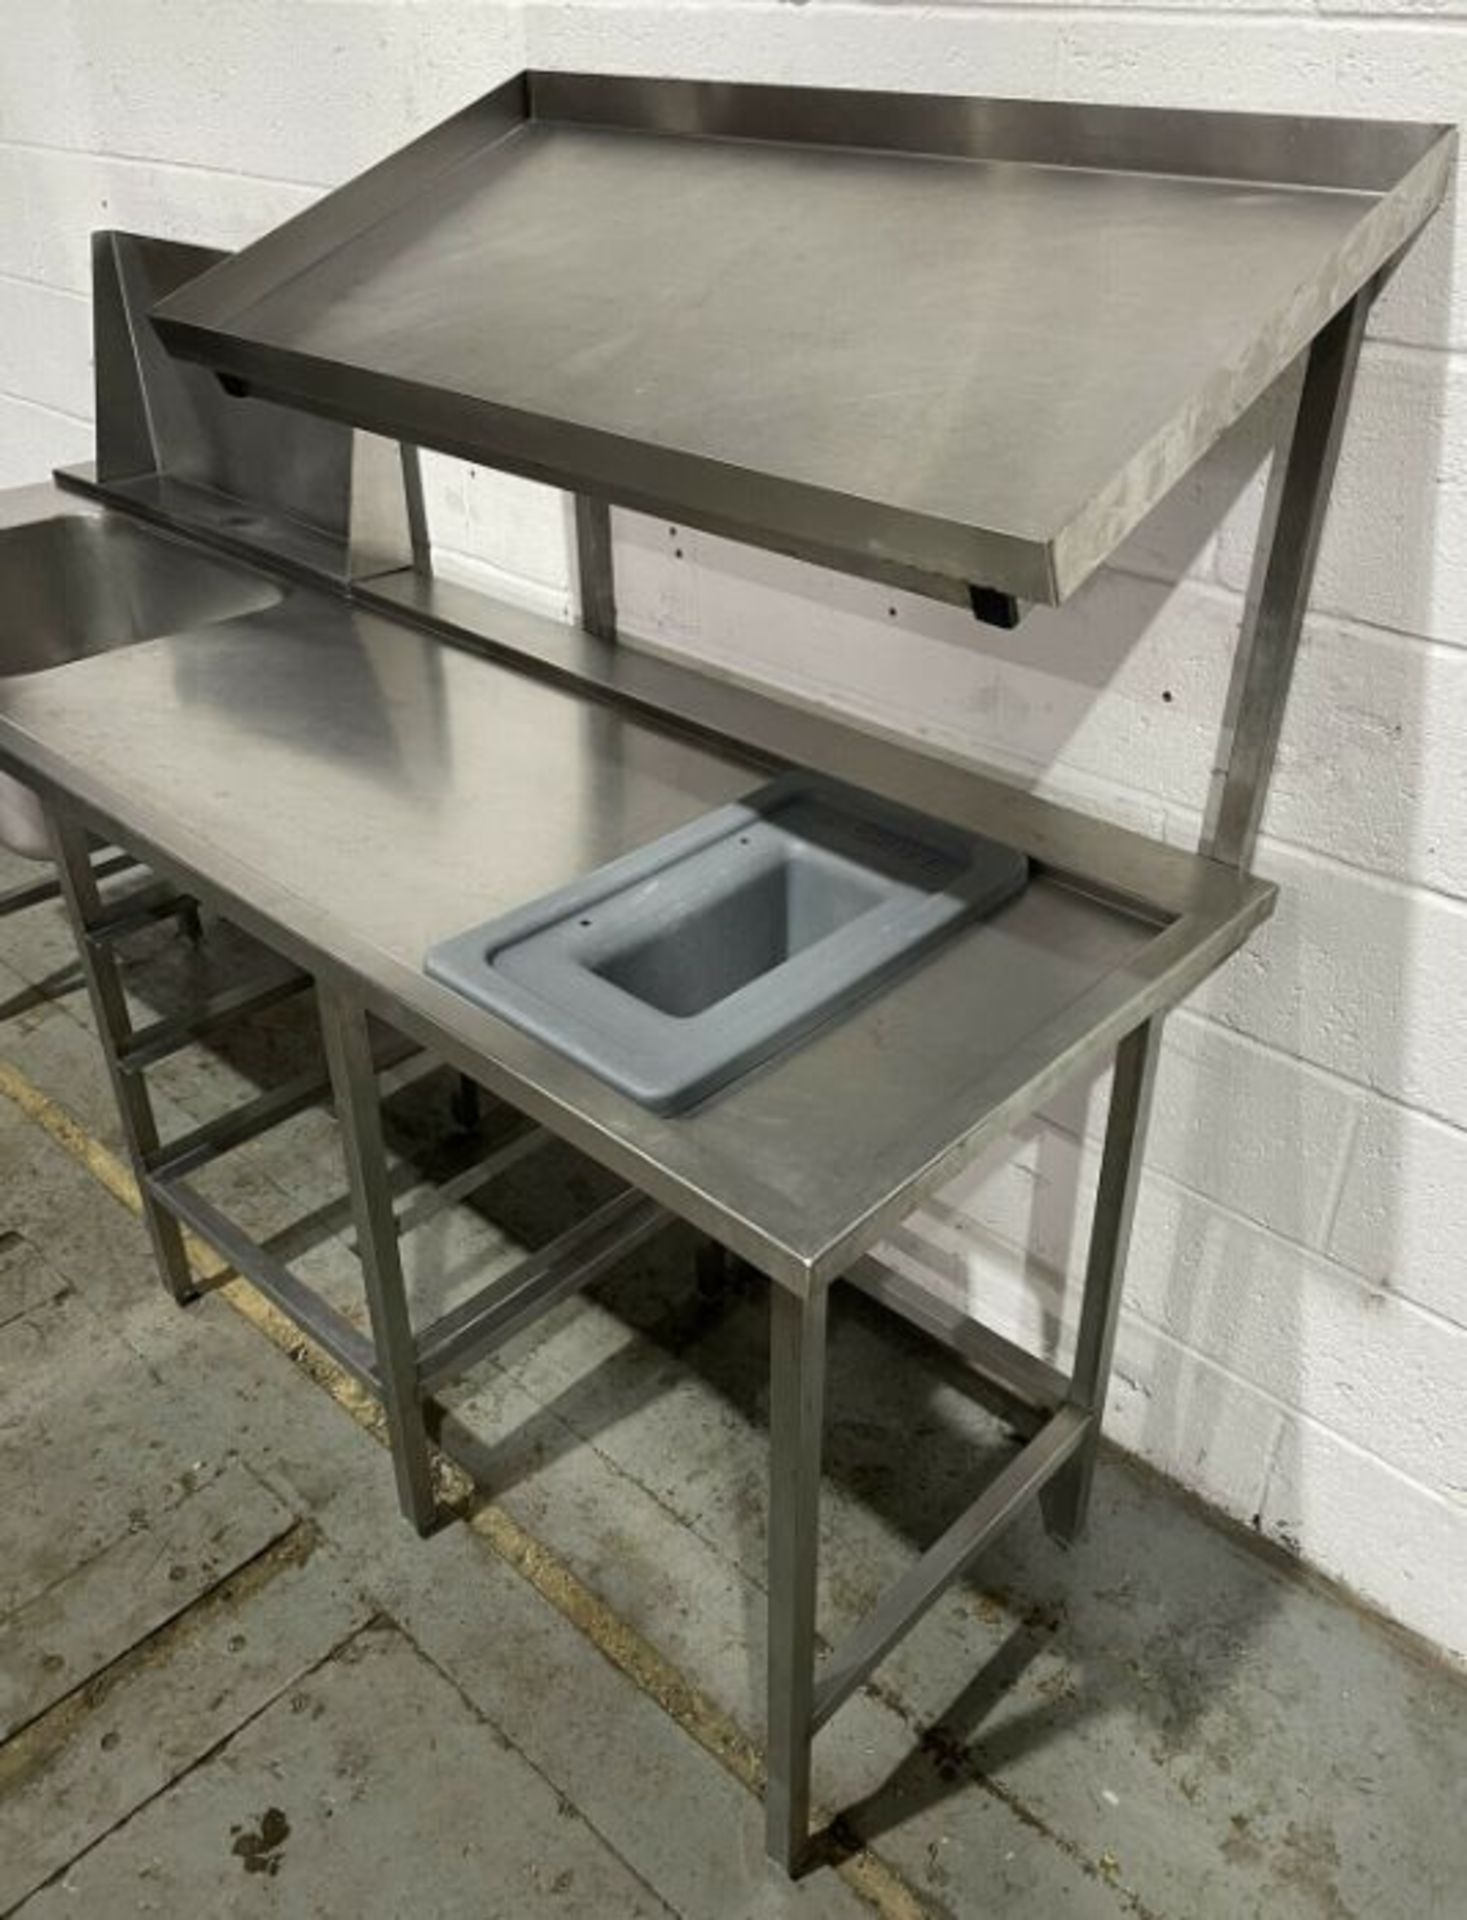 Righthand Dishwasher Entry Sink With Tray Racks 22 - Image 4 of 5